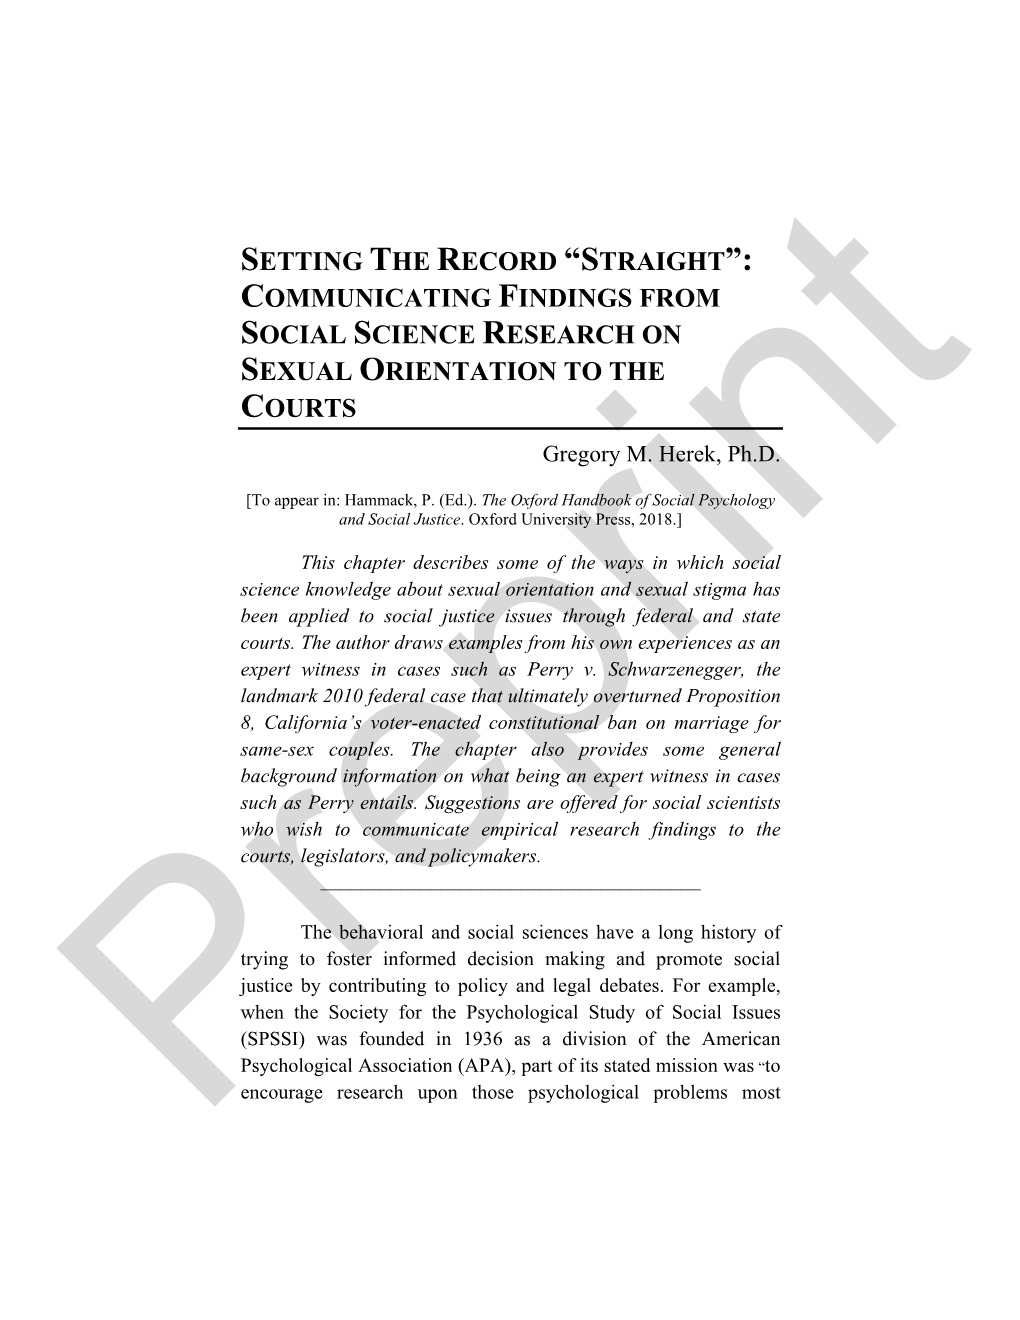 COMMUNICATING FINDINGS from SOCIAL SCIENCE RESEARCH on SEXUAL ORIENTATION to the COURTS Gregory M